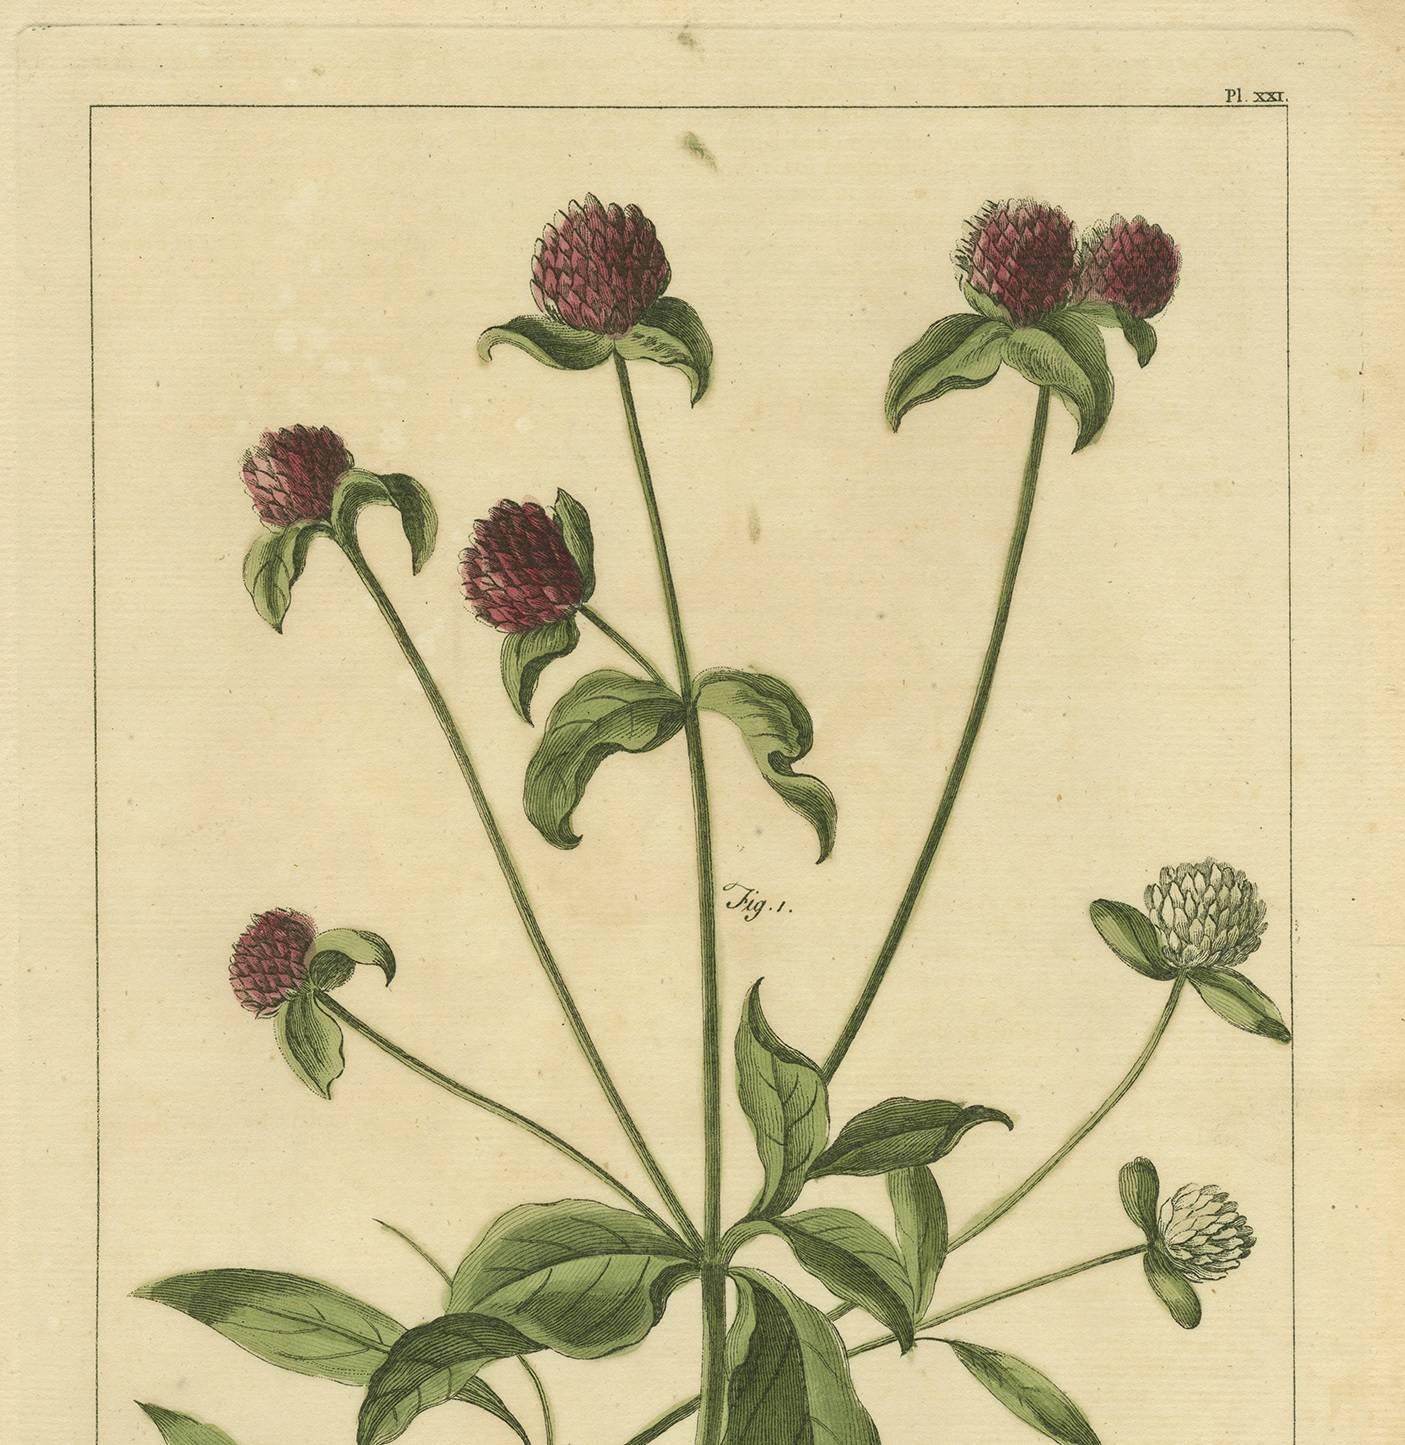 Plate XXI 'Amaranthoides', originates from 'Figures of the most beautiful, useful and uncommon plants described in the Gardener's Dictionary (..)' by P. Miller. 

Philip Miller was the principal horticulturalist in England in the mid-18th